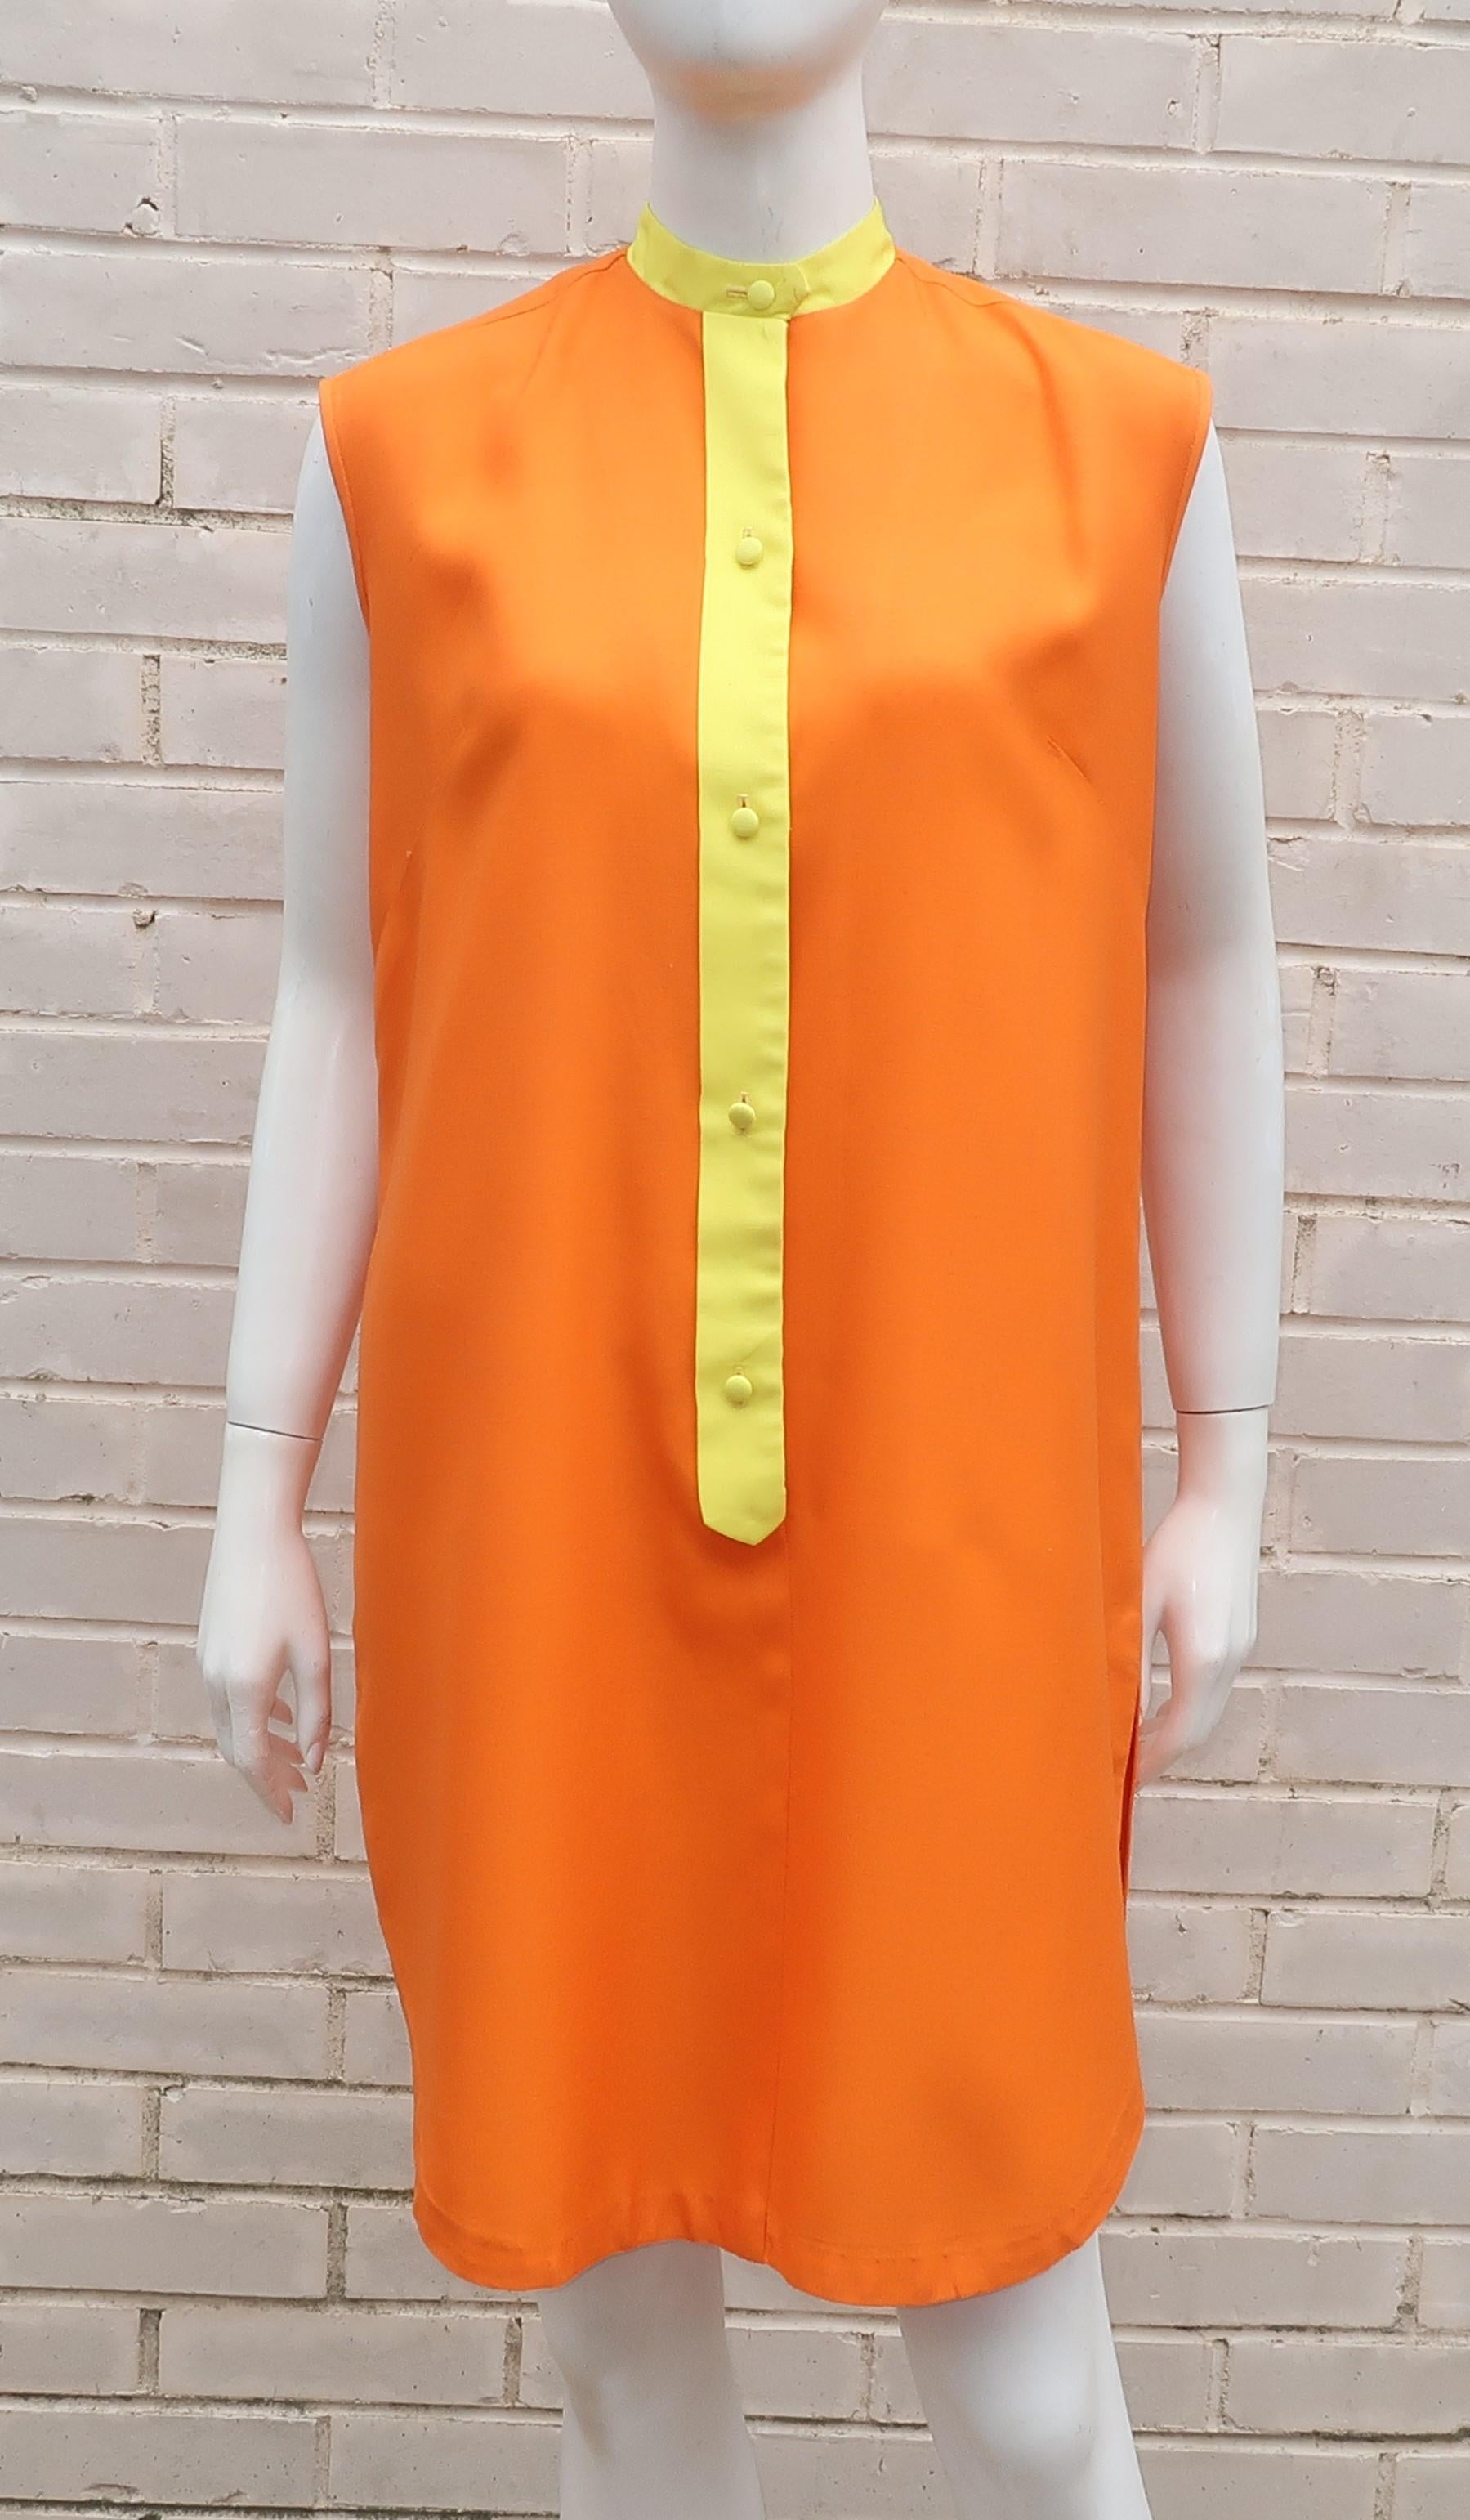 Saks Fifth Avenue bright orange cotton blend shift dress with a yellow Mandarin style neckline which buttons down the front.  The sleeveless silhouette and side vents provide a casual look that is perfect for easy Summertime fashions.
CONDITION
Good